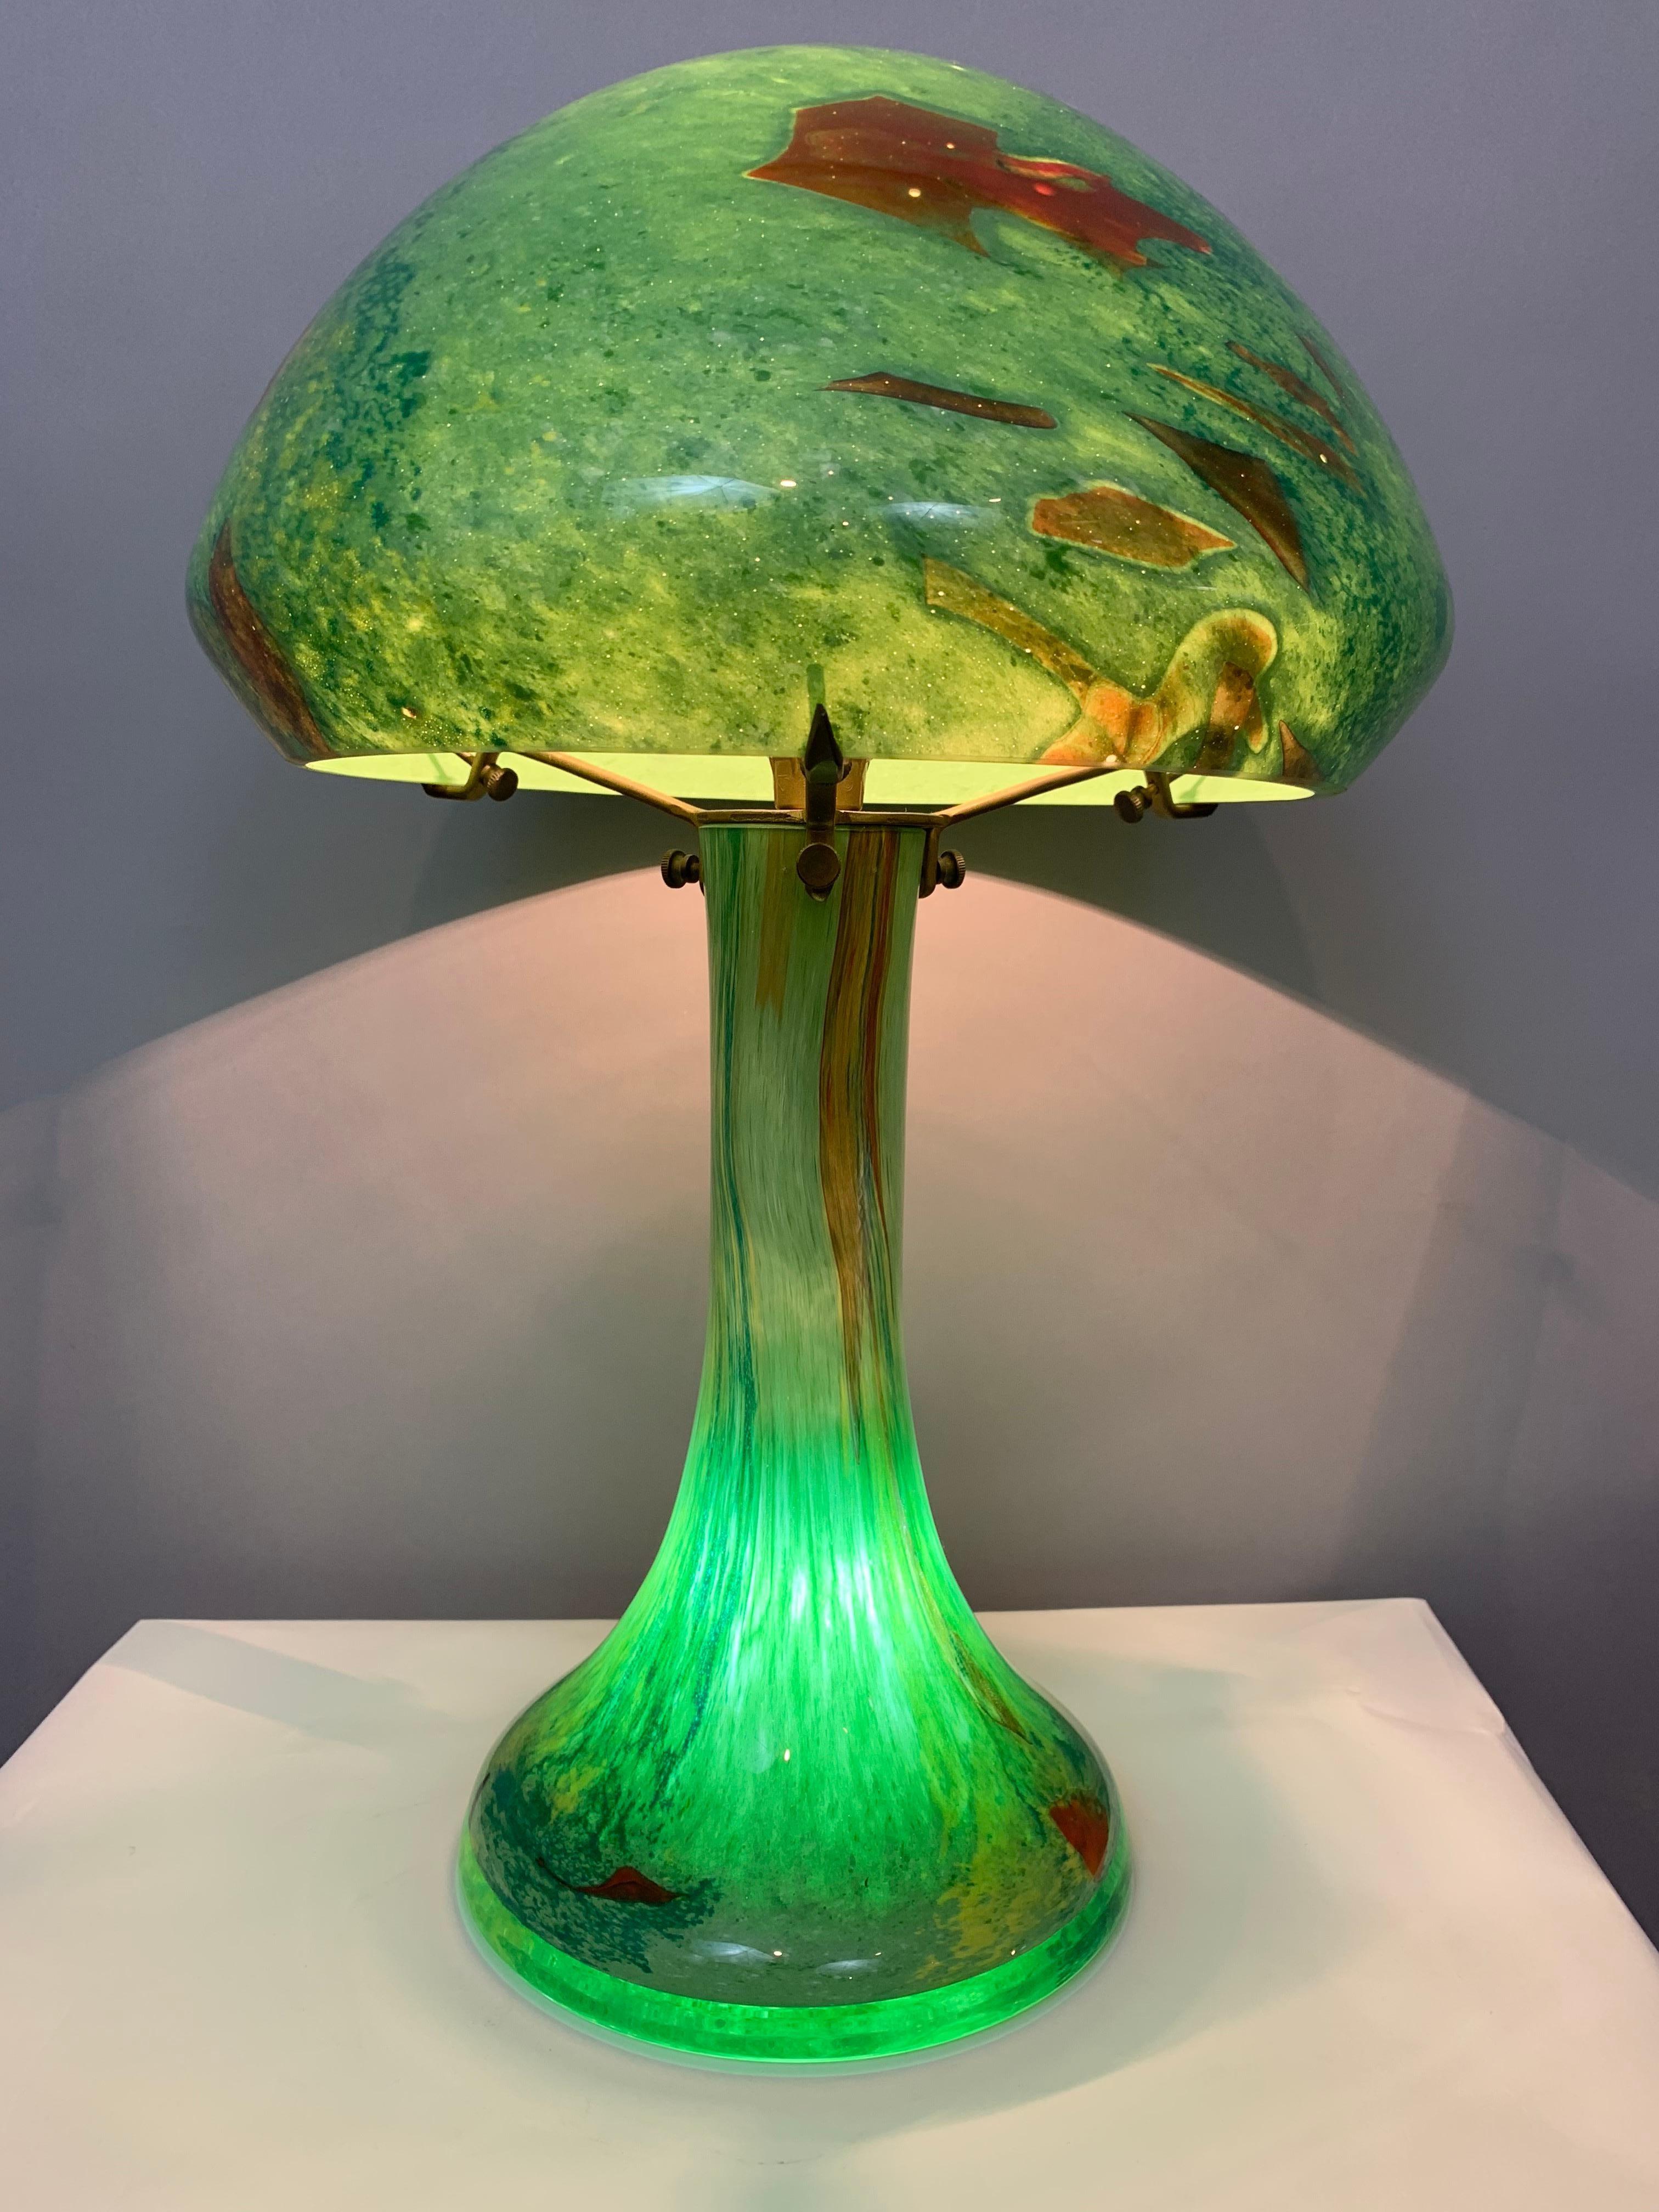 A stunning Art Deco Murano glass domed or mushroom shaped table lamp in the style of Le Verre Francais. The dome features a number of different abstract shaped fish swimming around which gives the illusion of an aquarium. The dome as well as the